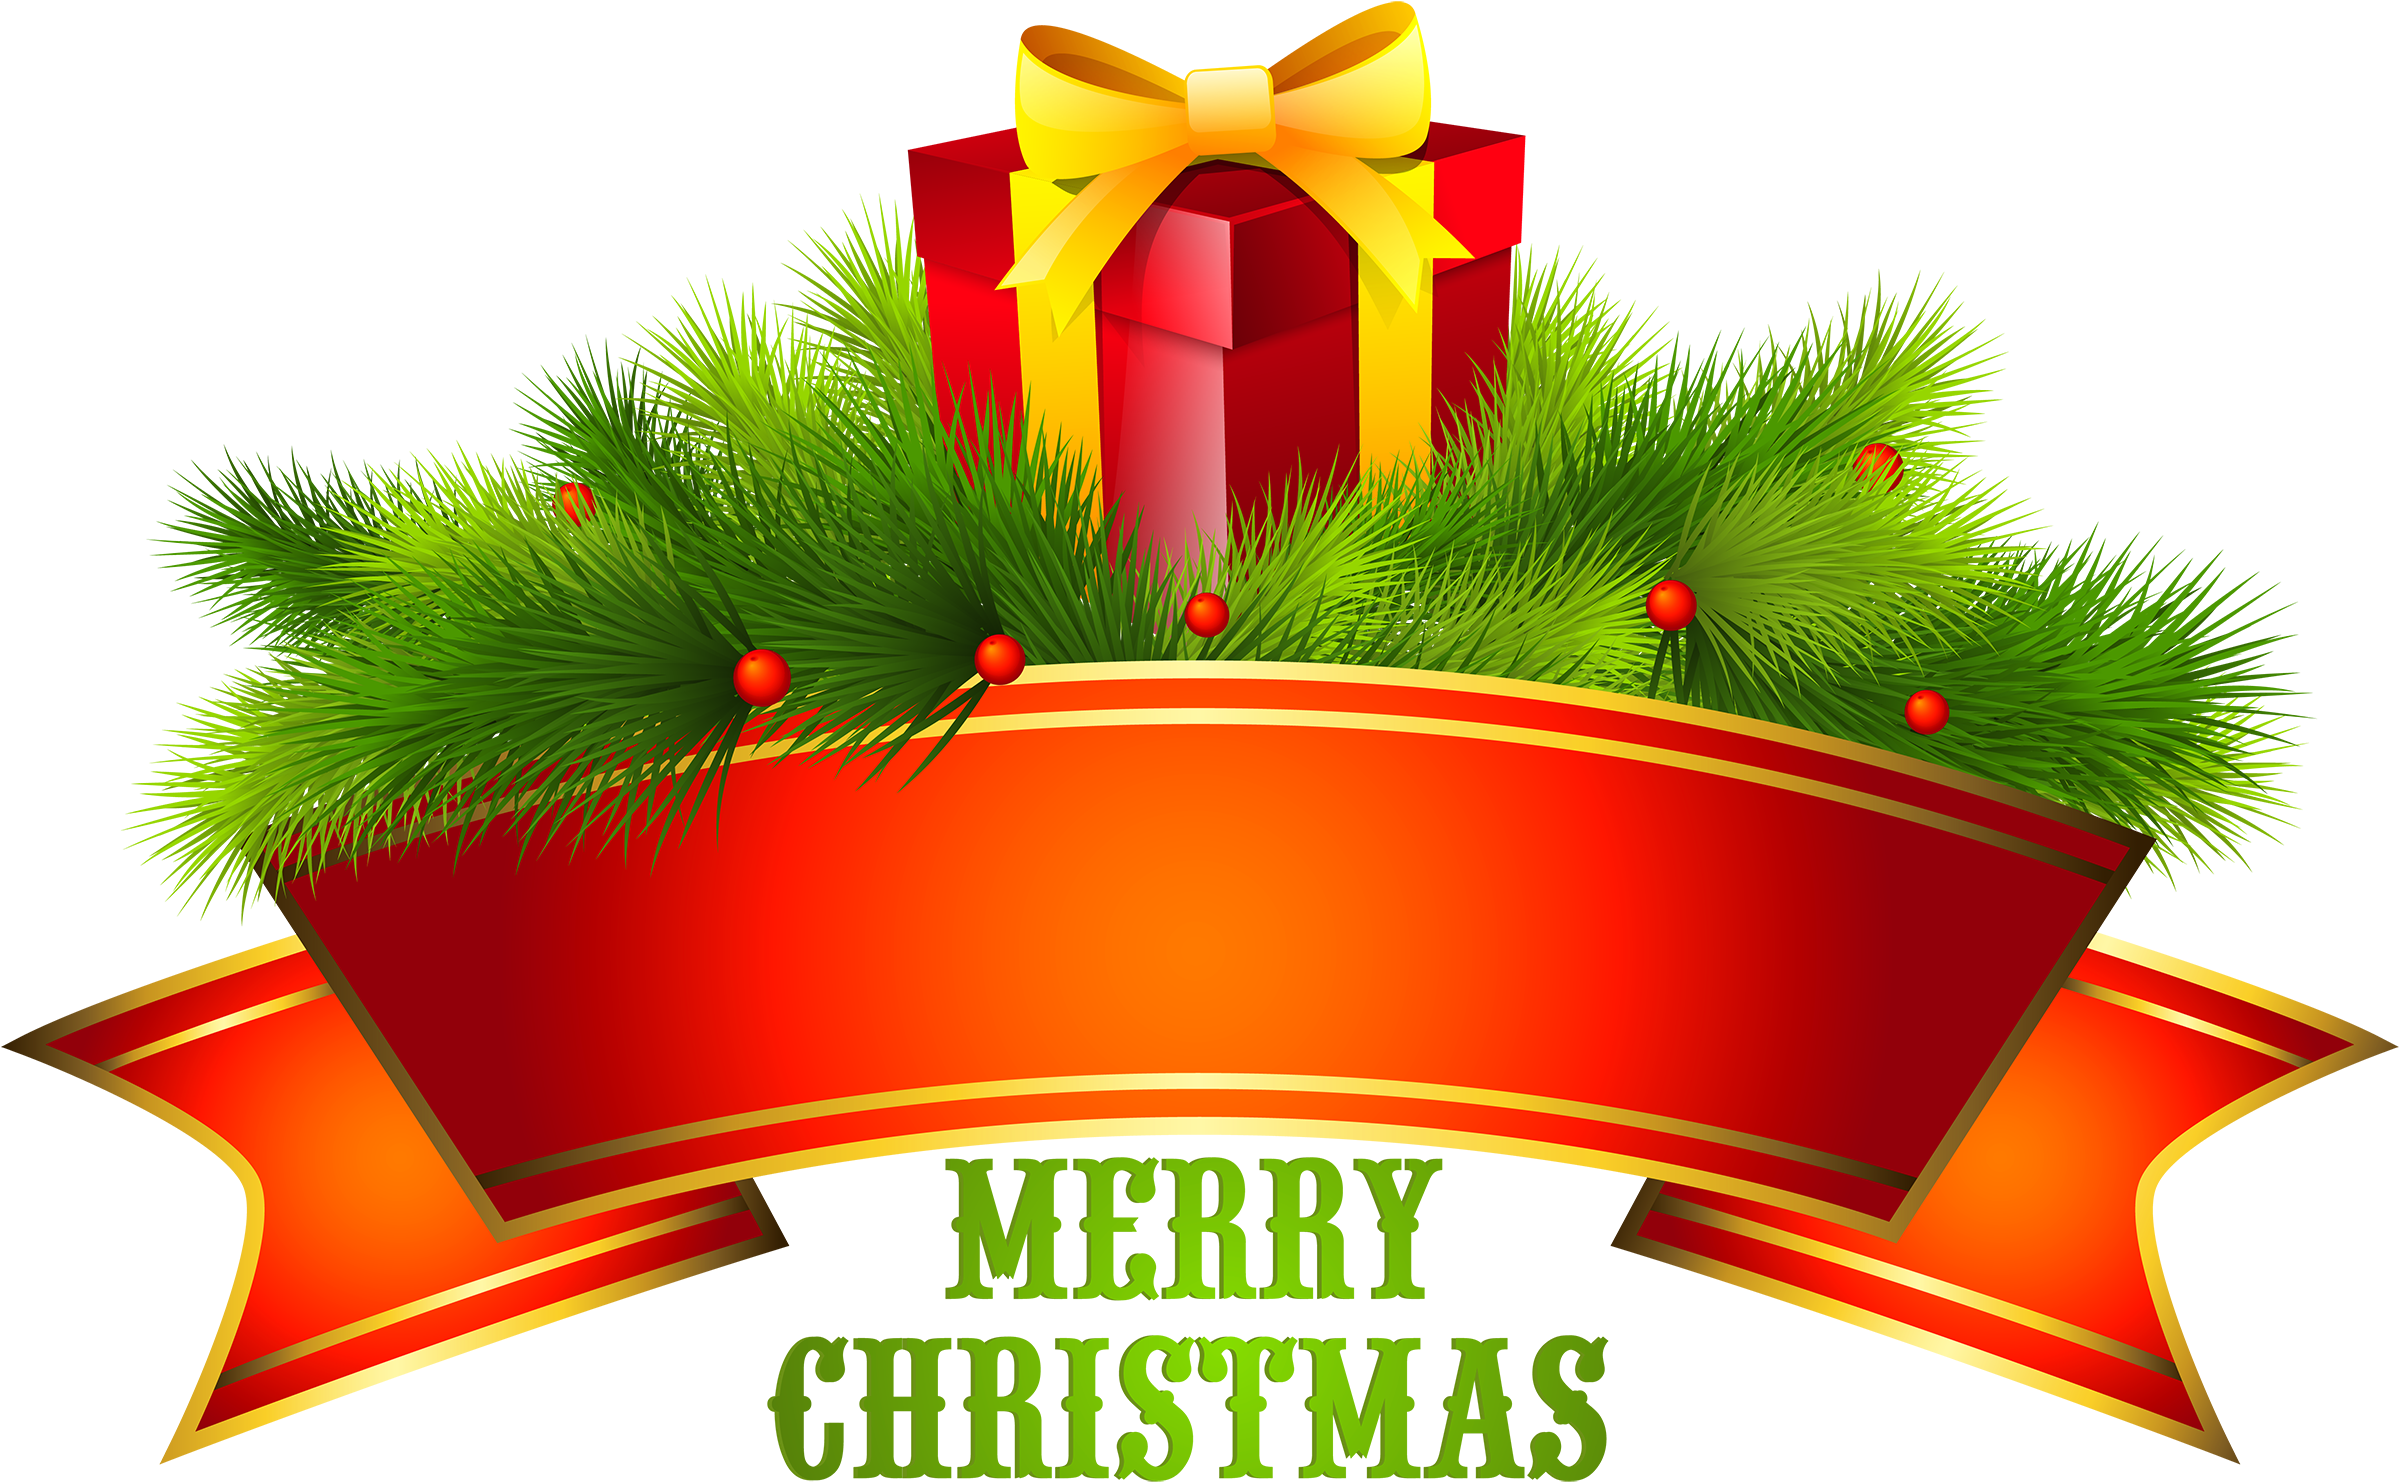 Text Christmas Happy Download Free Image PNG Image